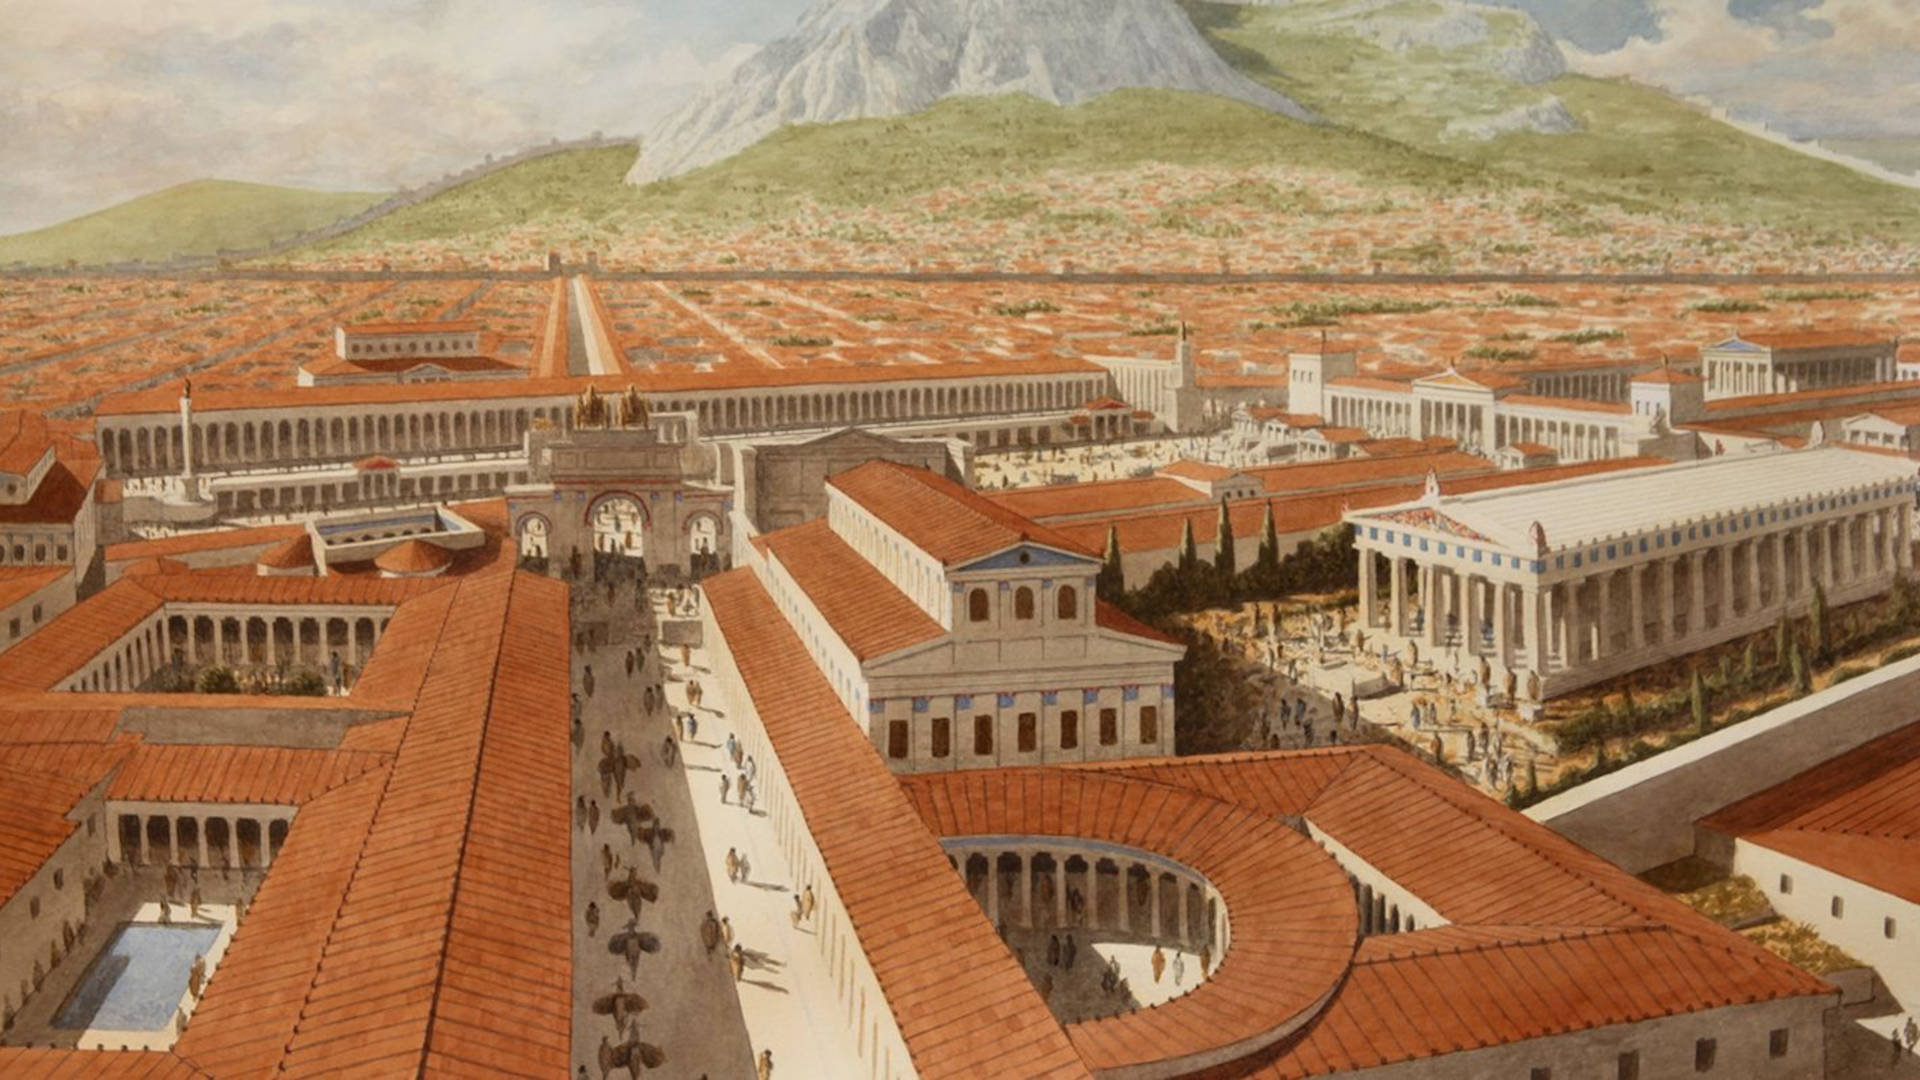 Balage Balogh's painting, "Corinth, Southern Greece, the Forum and Civic Center"